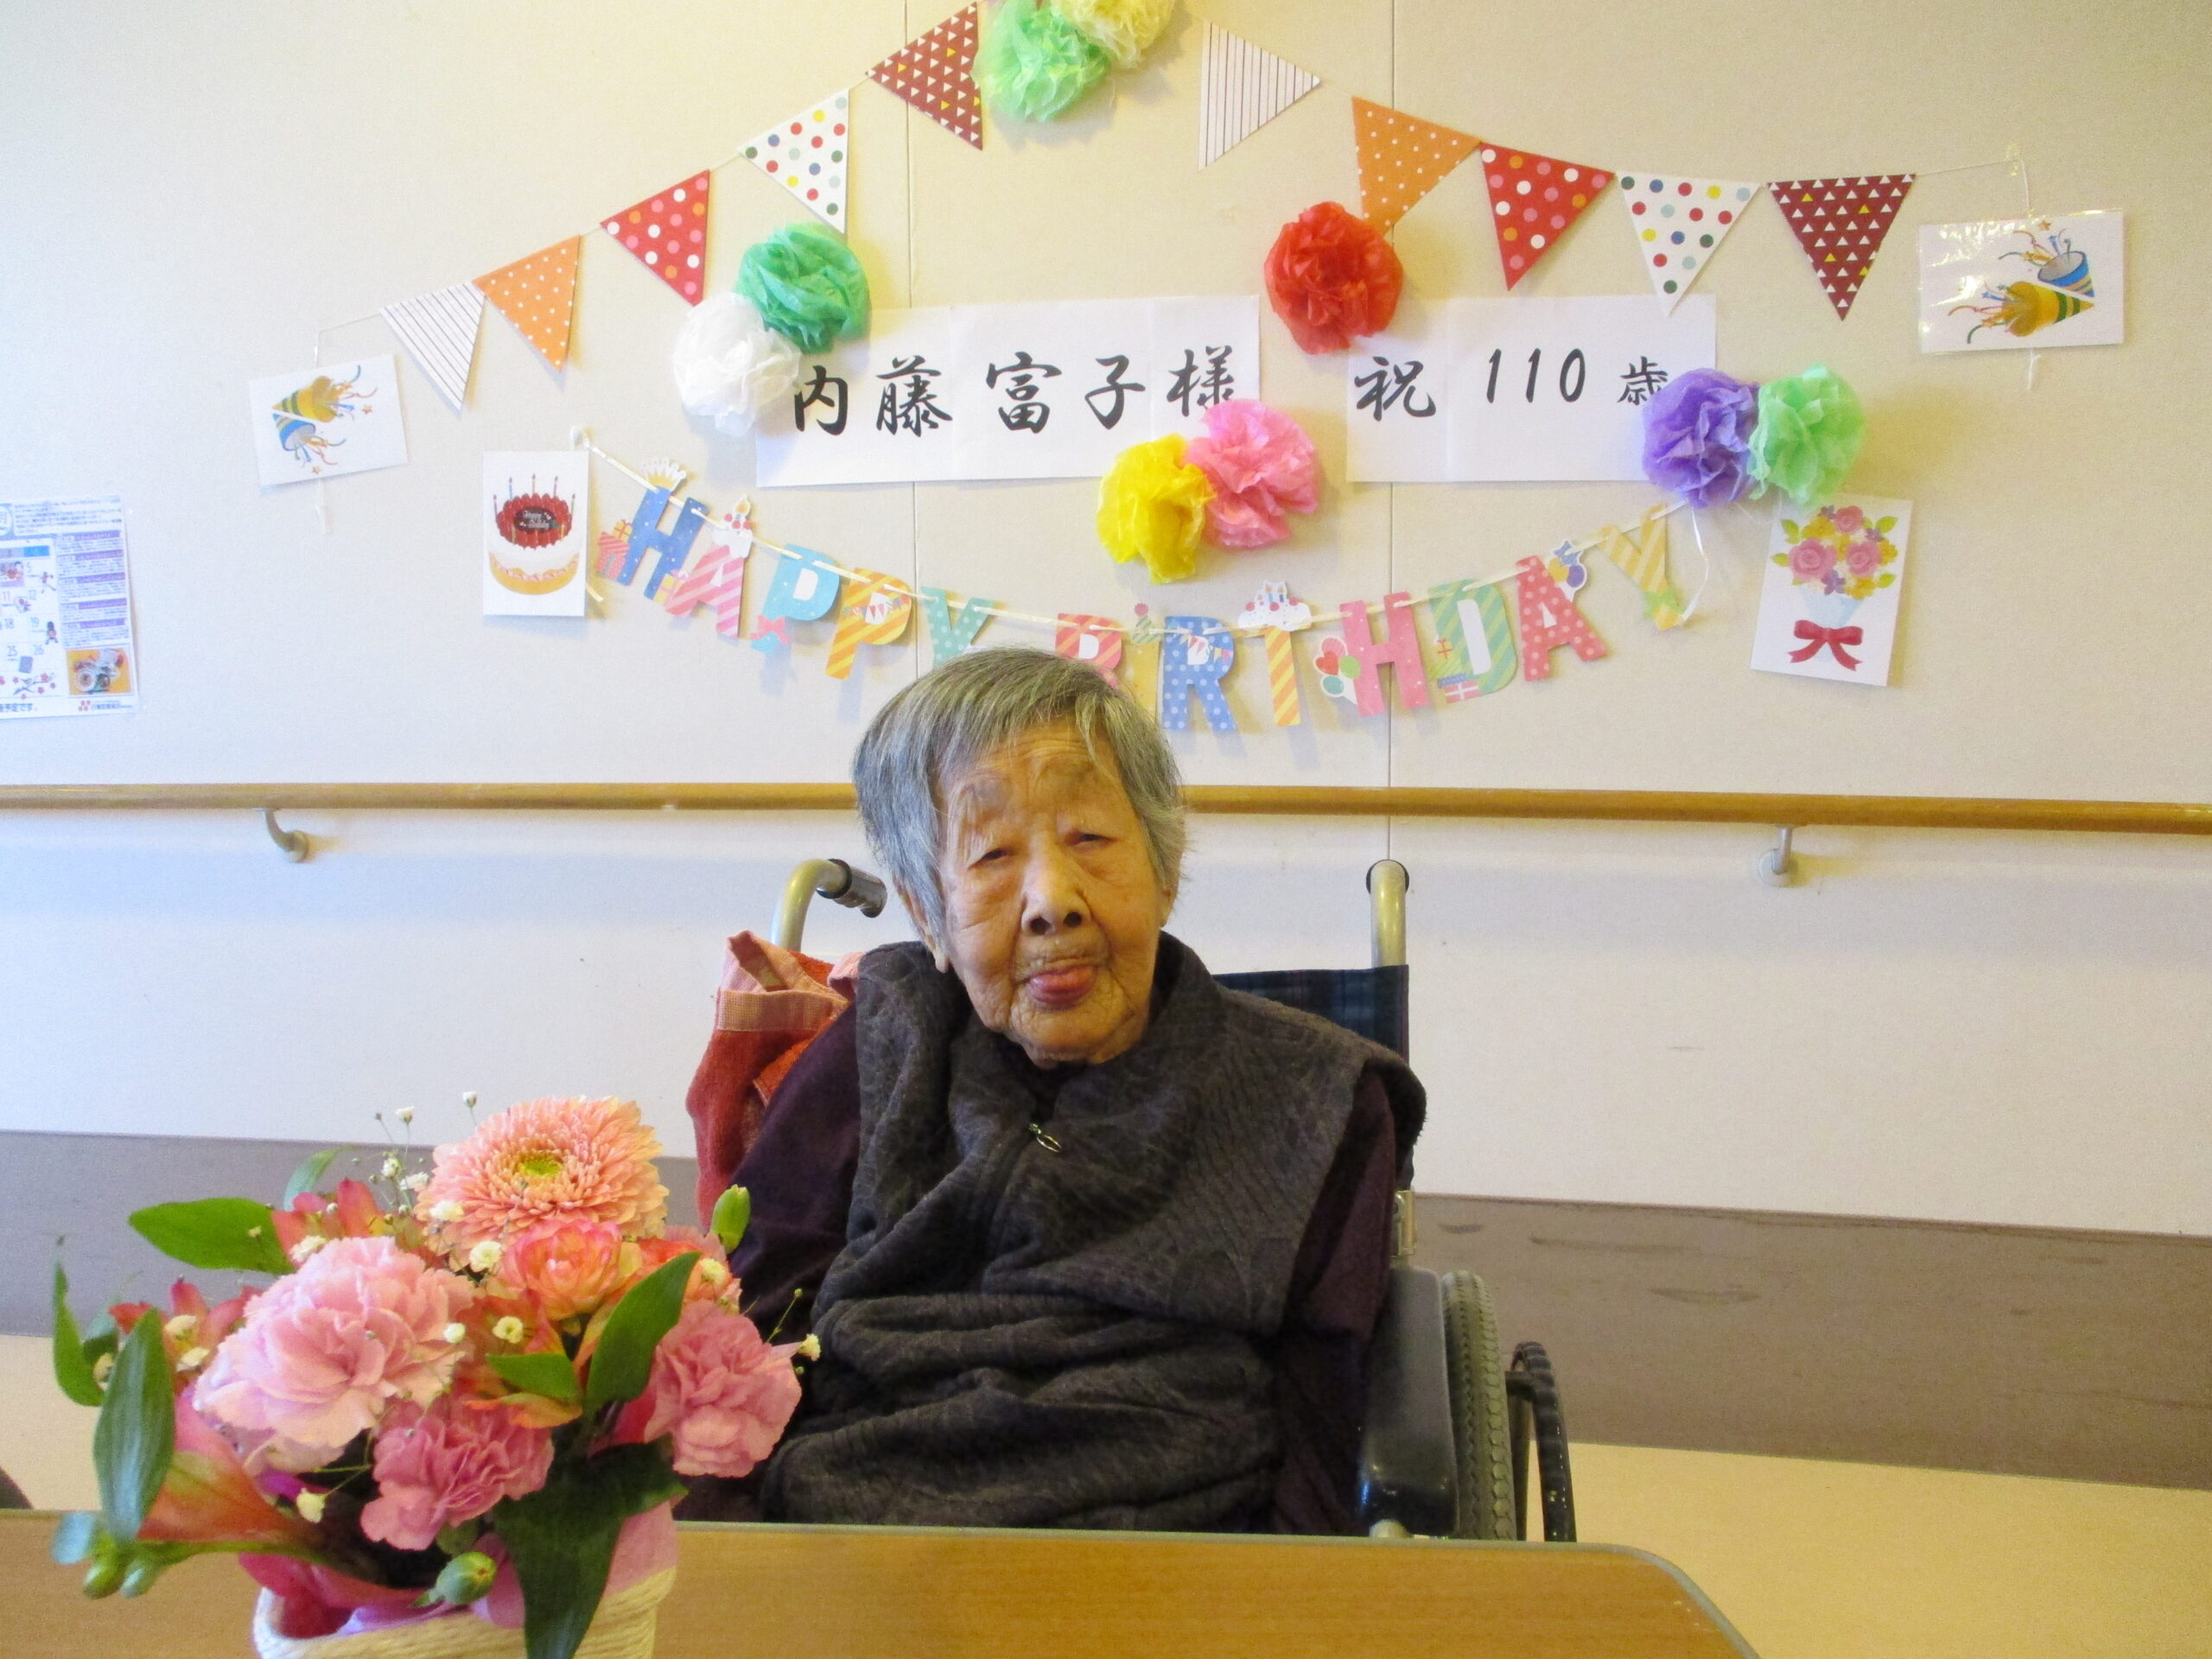 On her 110th birthday in February 2022. (Source: Courtesy of the nursing home)